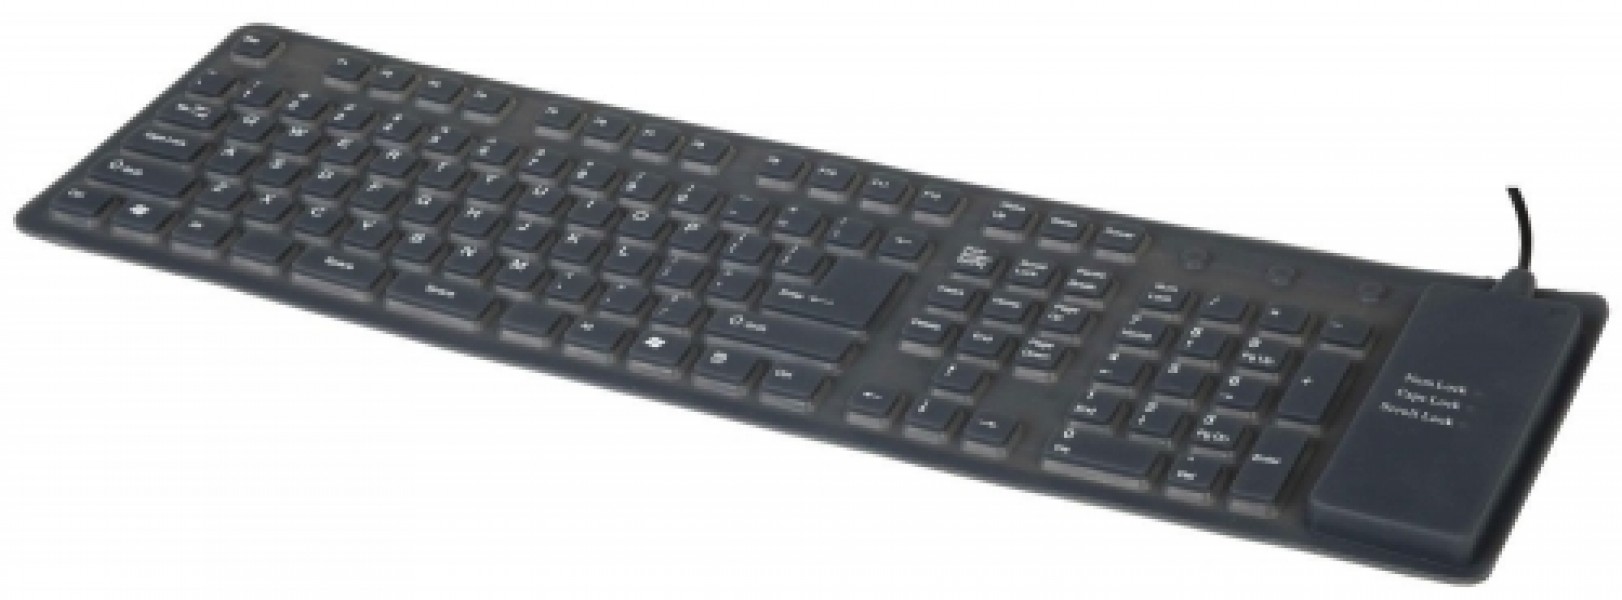 Gembird Flexible keyboard, USB + PS/2 combo, black color, US layout